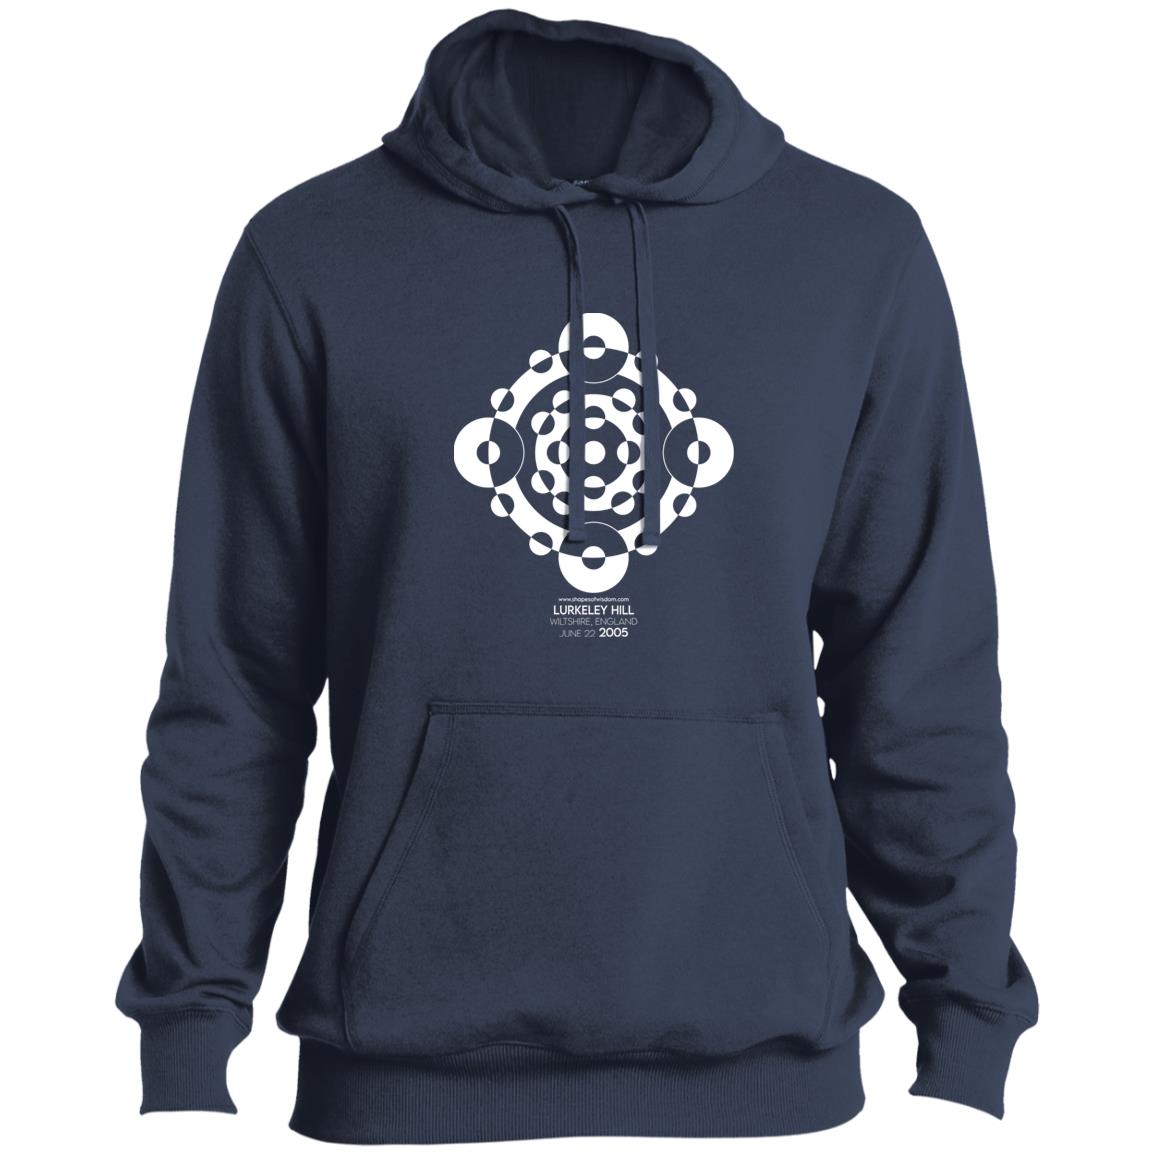 Crop Circle Pullover Hoodie - Lurkeley Hill 2